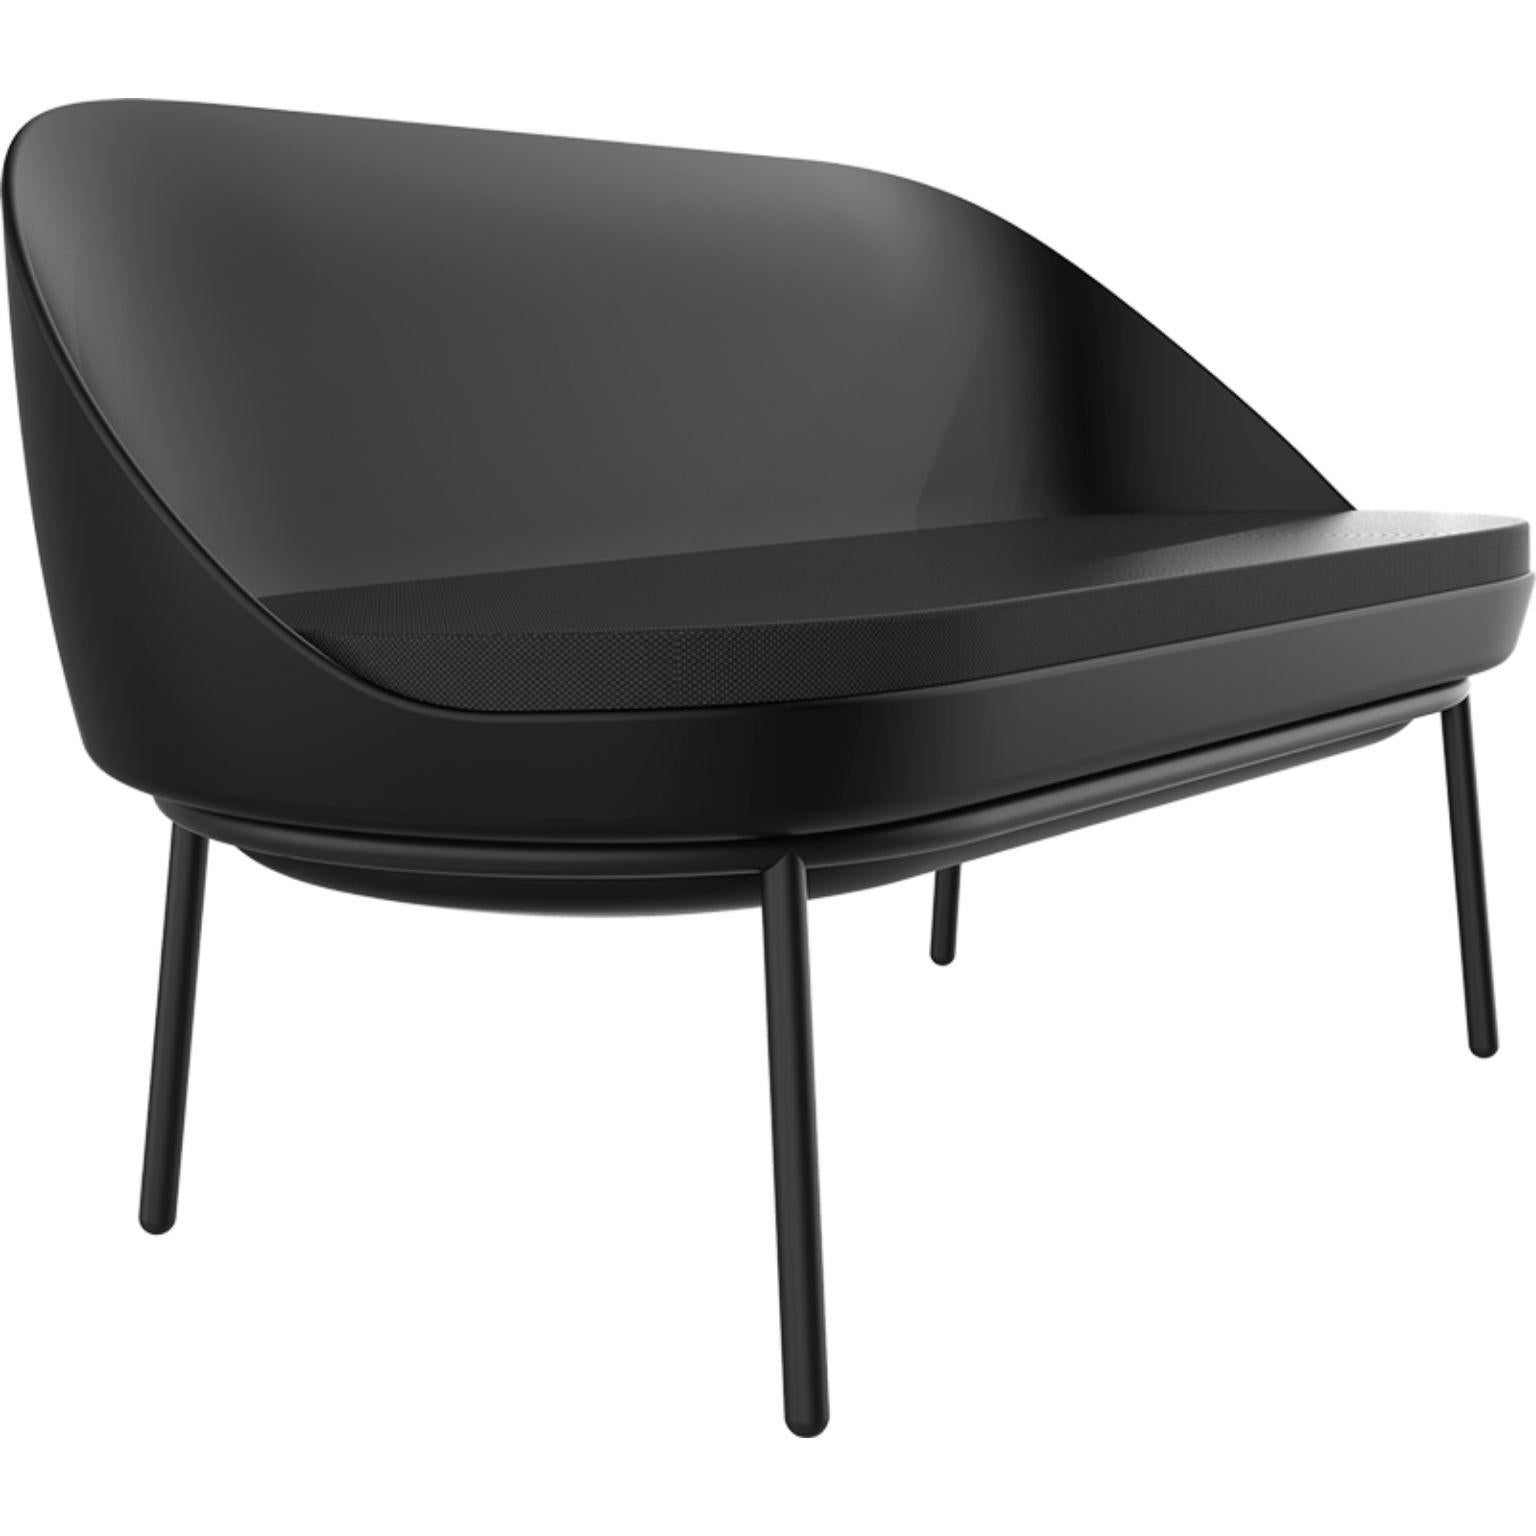 Lace black sofs with cushion by MOWEE
Dimensions: D66 x W135 x H75.5 cm
Material: polyethylene, stainless steel
Weight: 21 kg
Also Available in different colours and finishes. 

Lace is a collection of furniture made by rotomoulding. Its shape